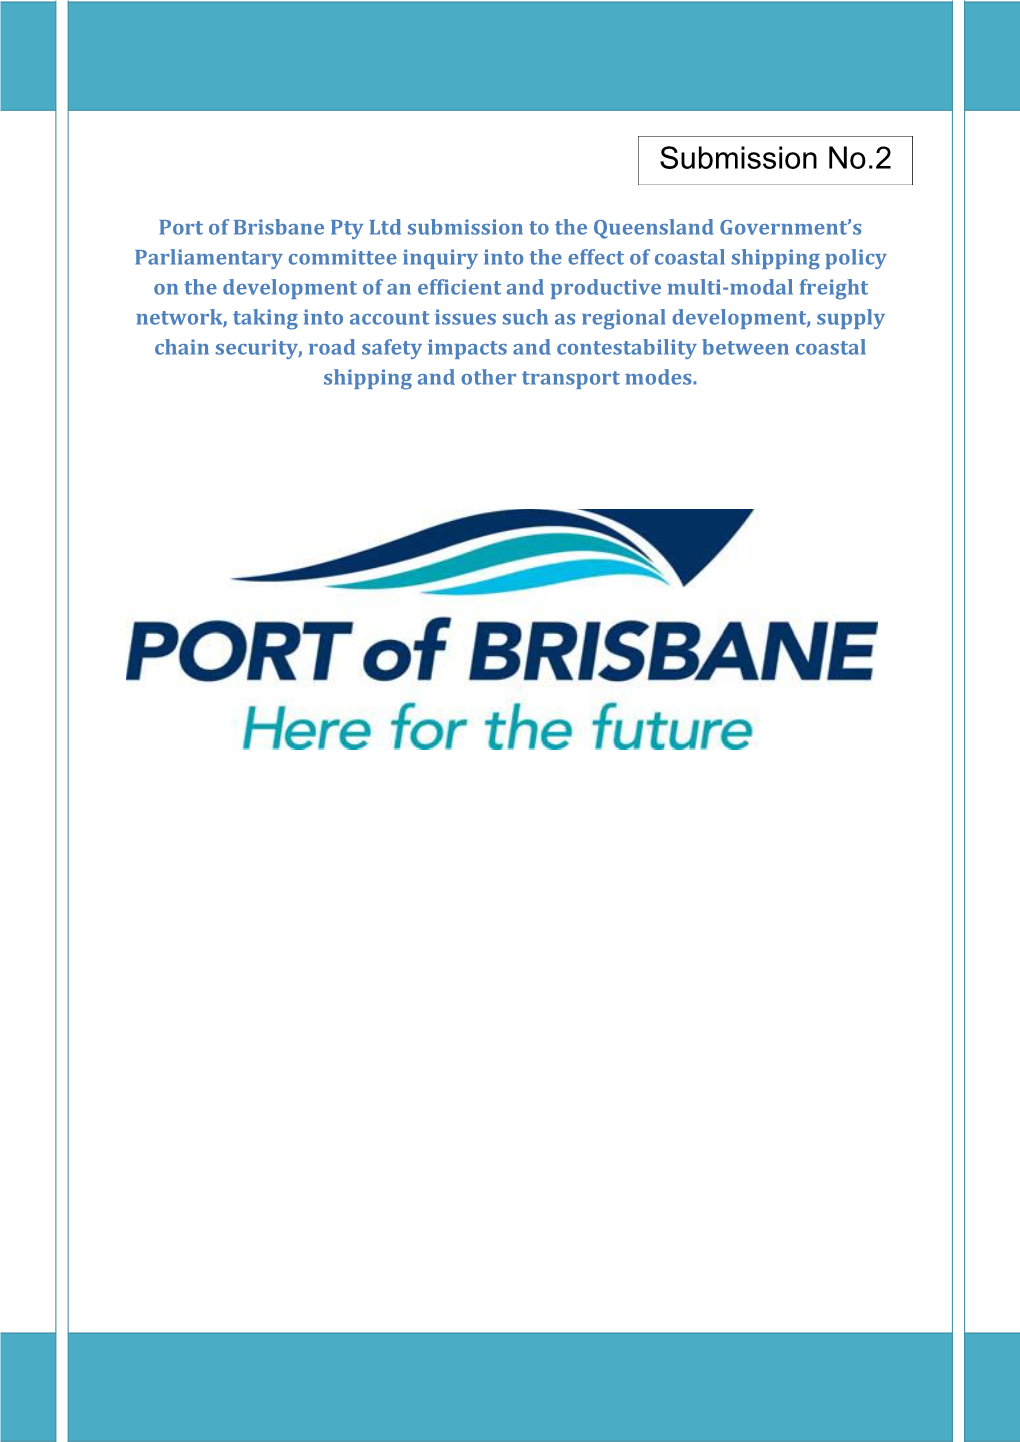 Port of Brisbane Pty Ltd Submission to the Queensland Government's